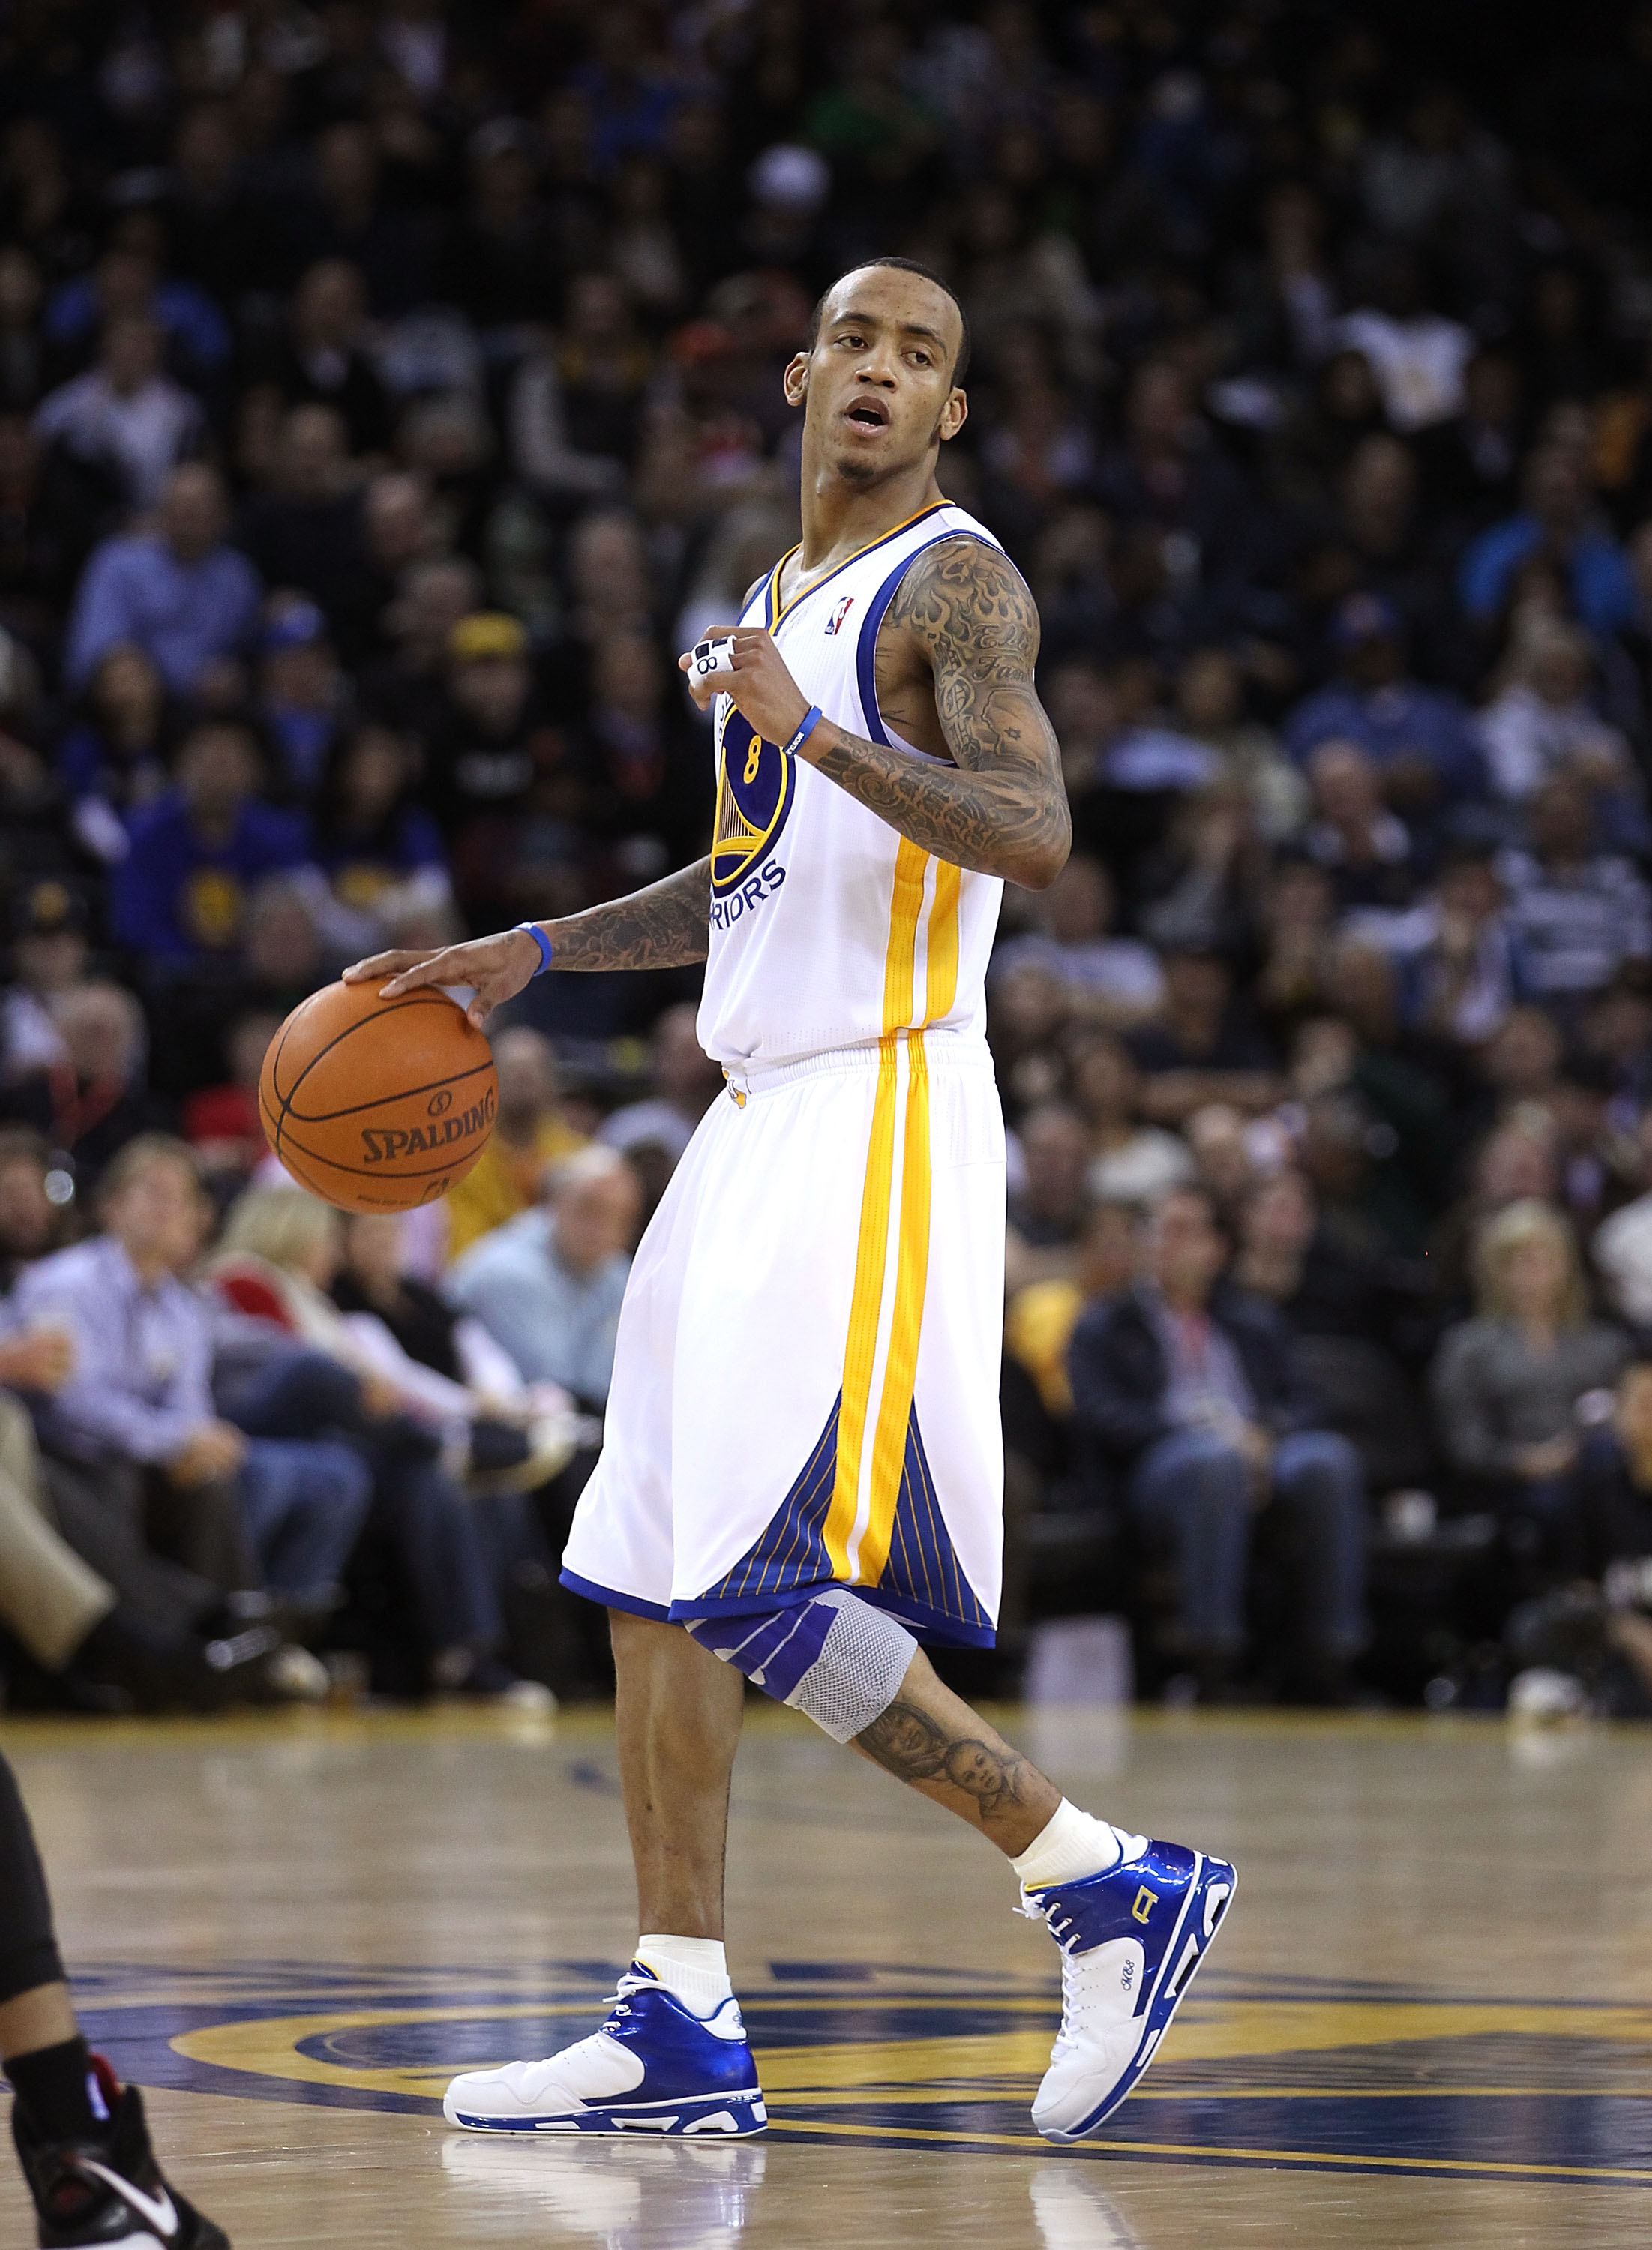 Monta Ellis reflects on relationship with Steph Curry